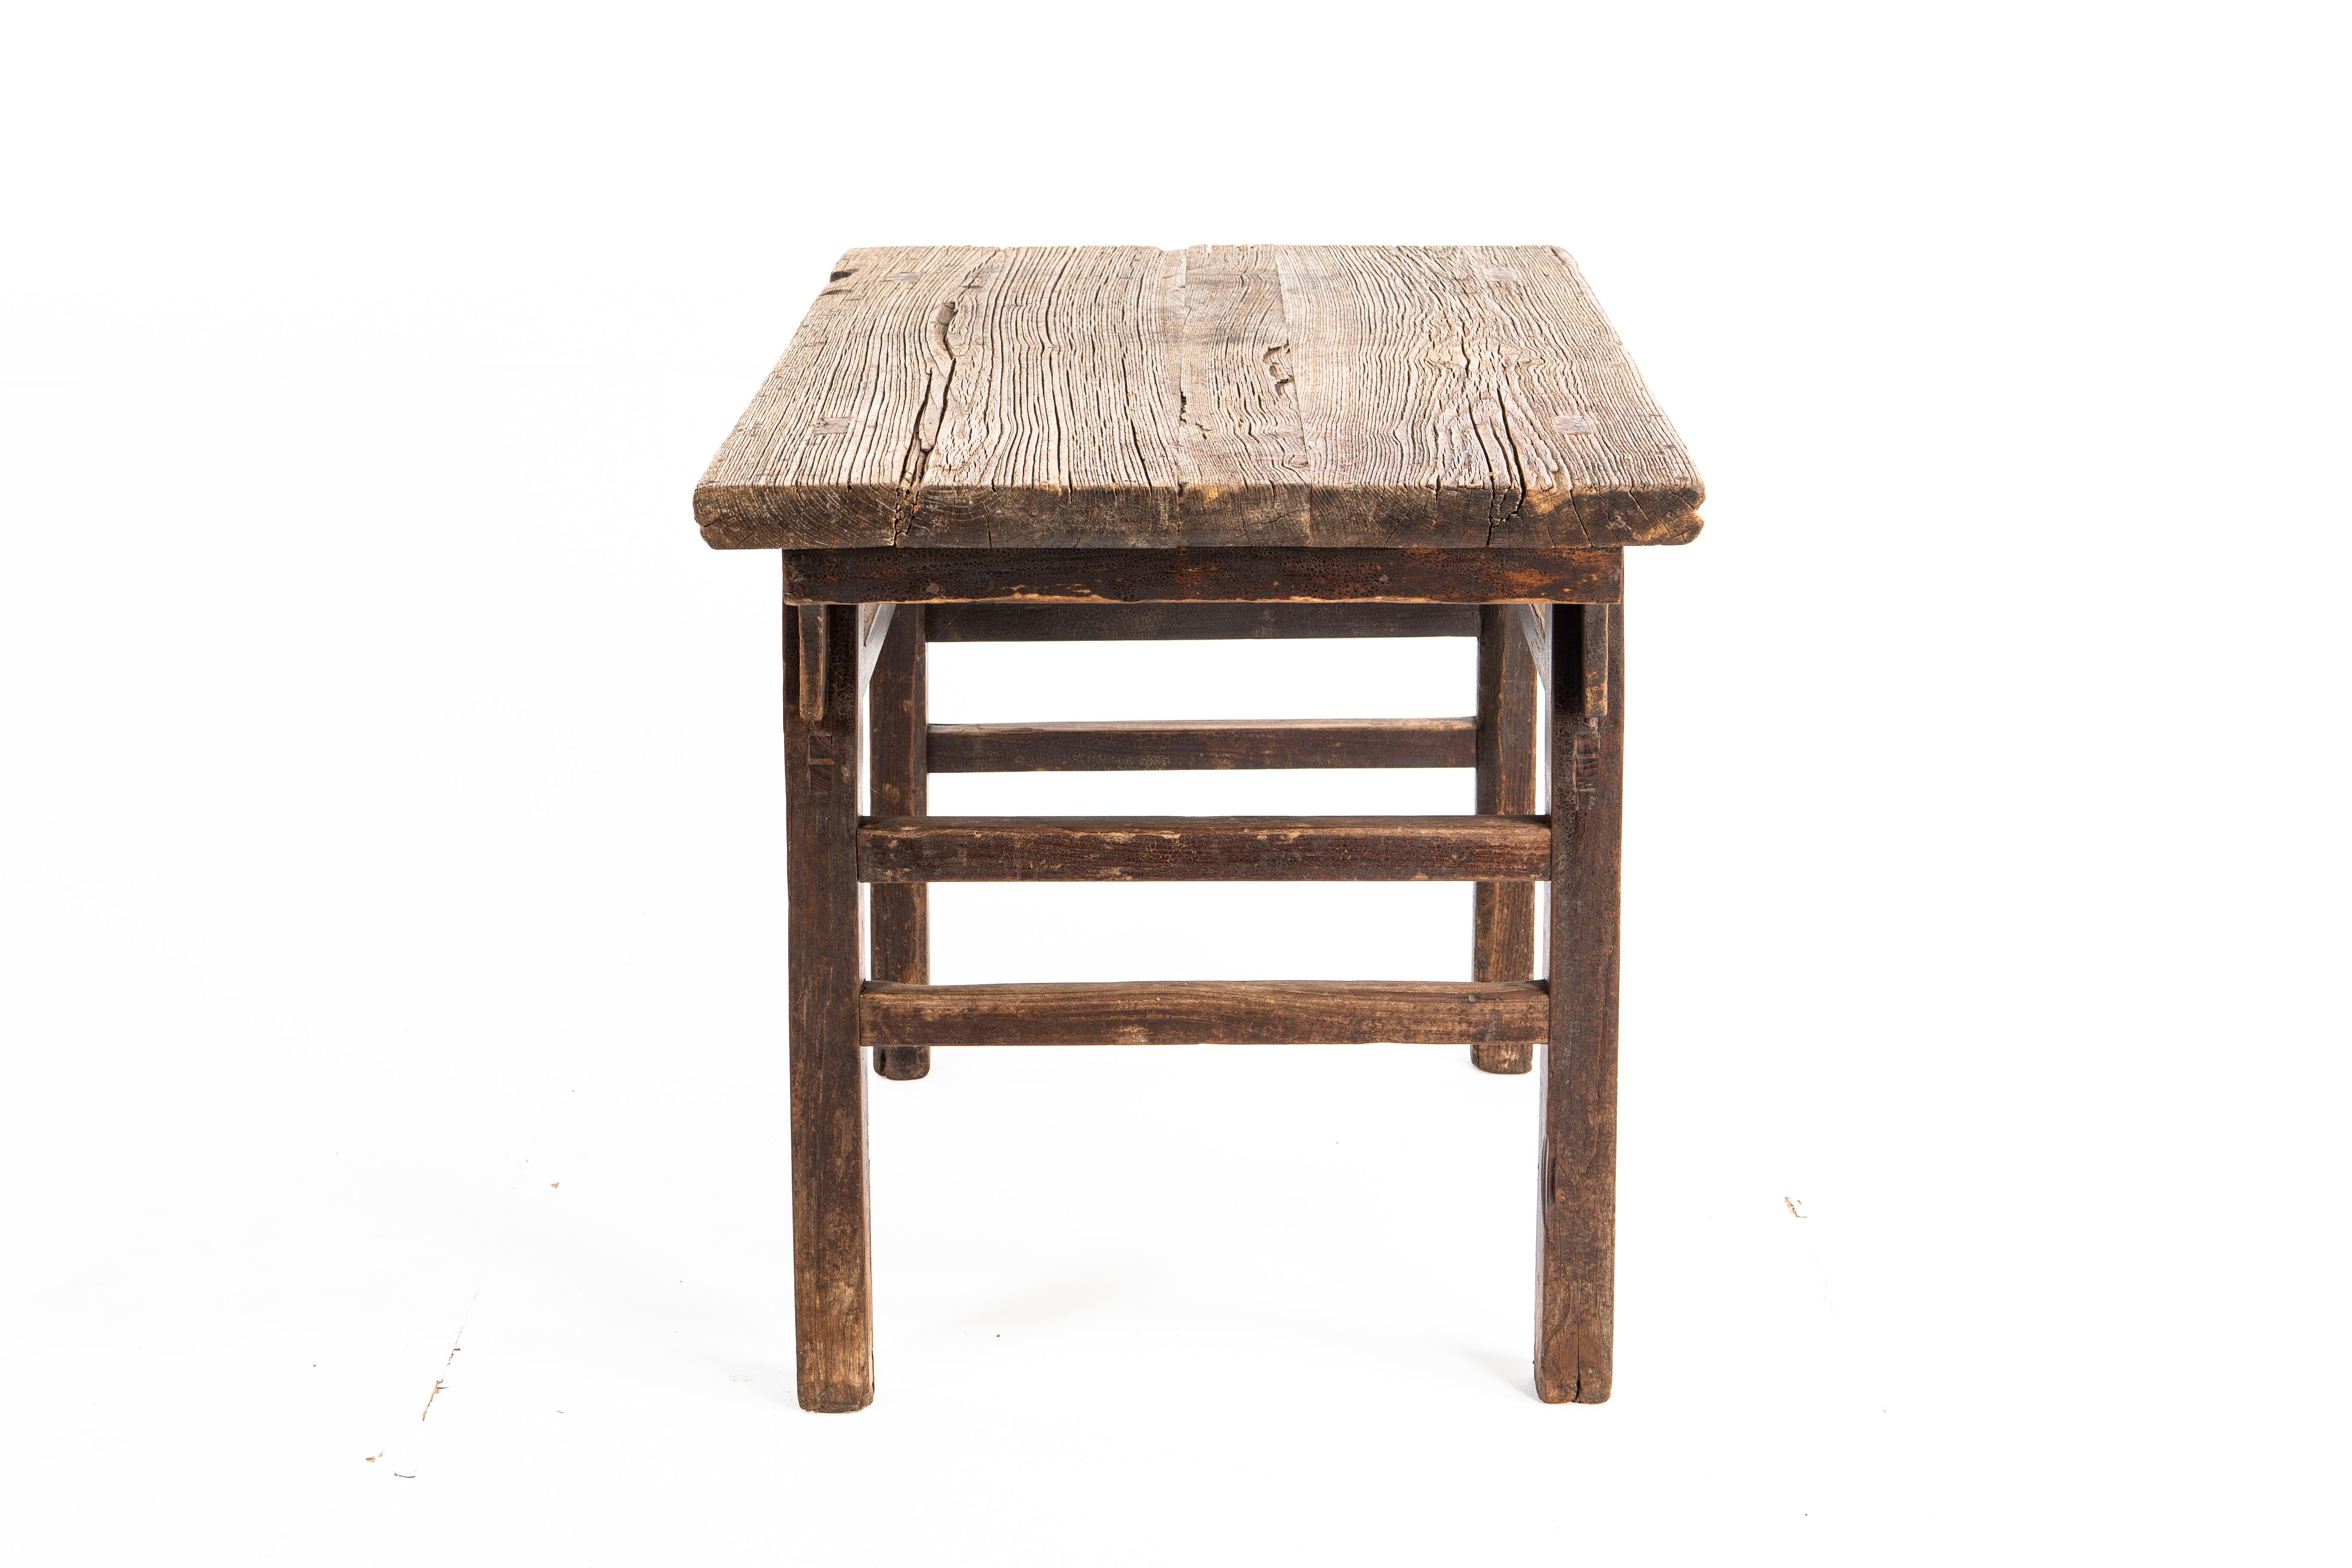 19th Century Late-Qing Dynasty Small Side Table